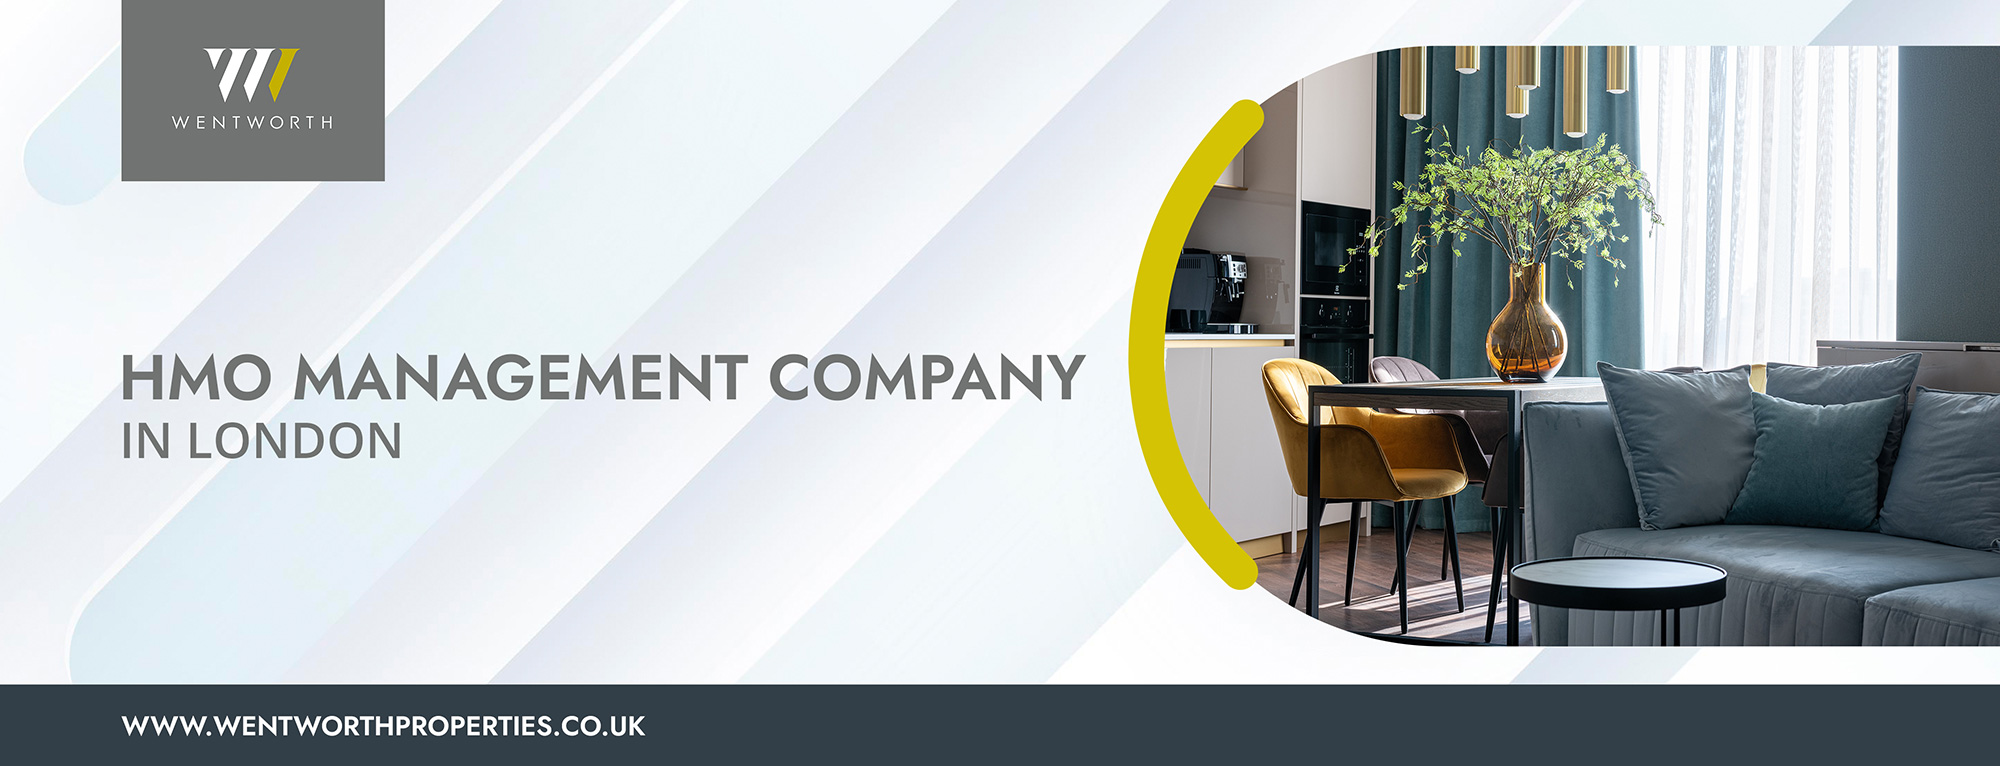 HMO property management company in London